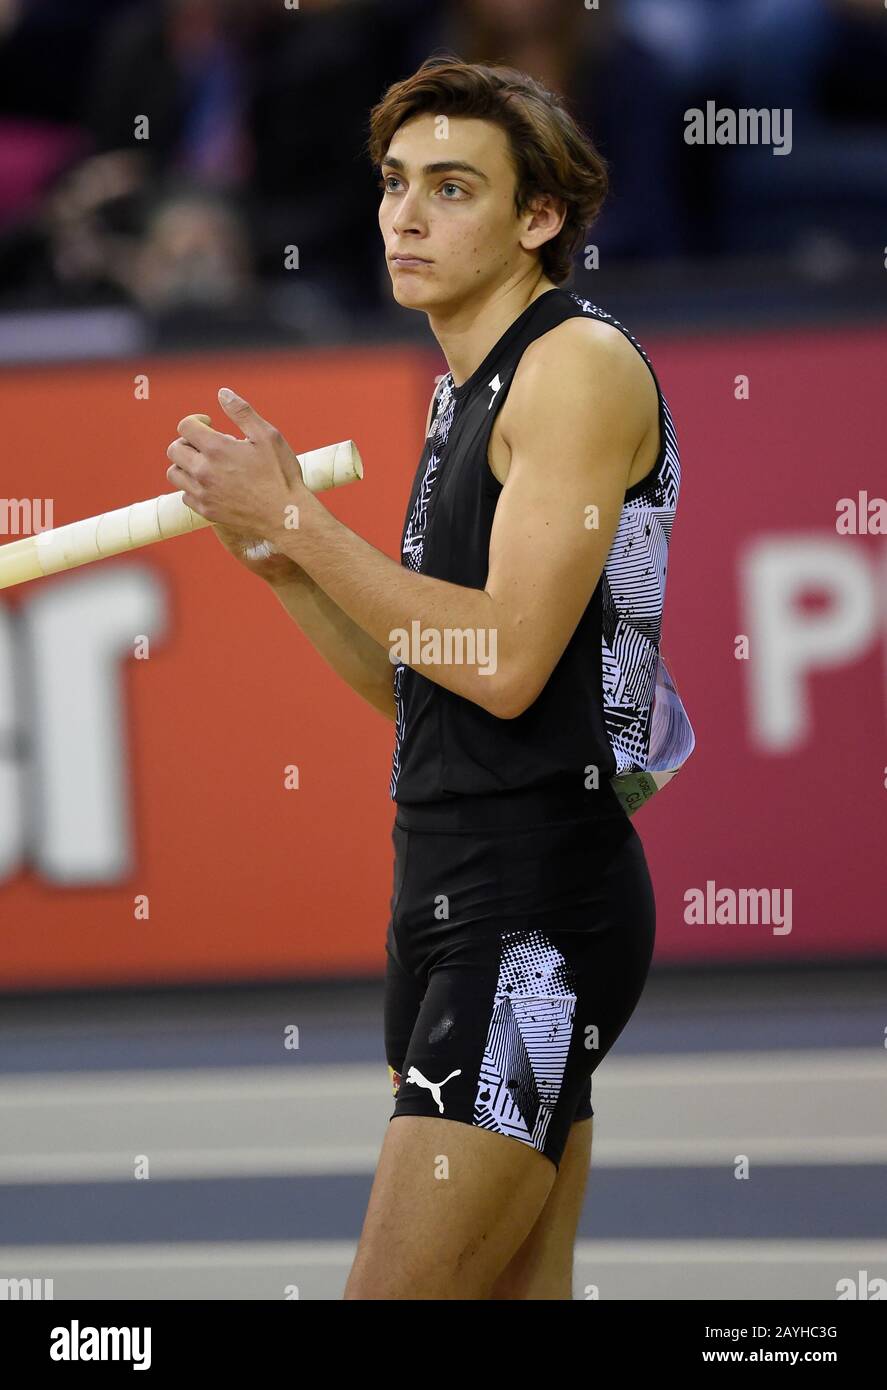 Sweden's Armand Duplantis who went on to break the Indoor Pole Vault world record during the Muller Indoor Grand Prix at Emirates Arena, Glasgow. Stock Photo